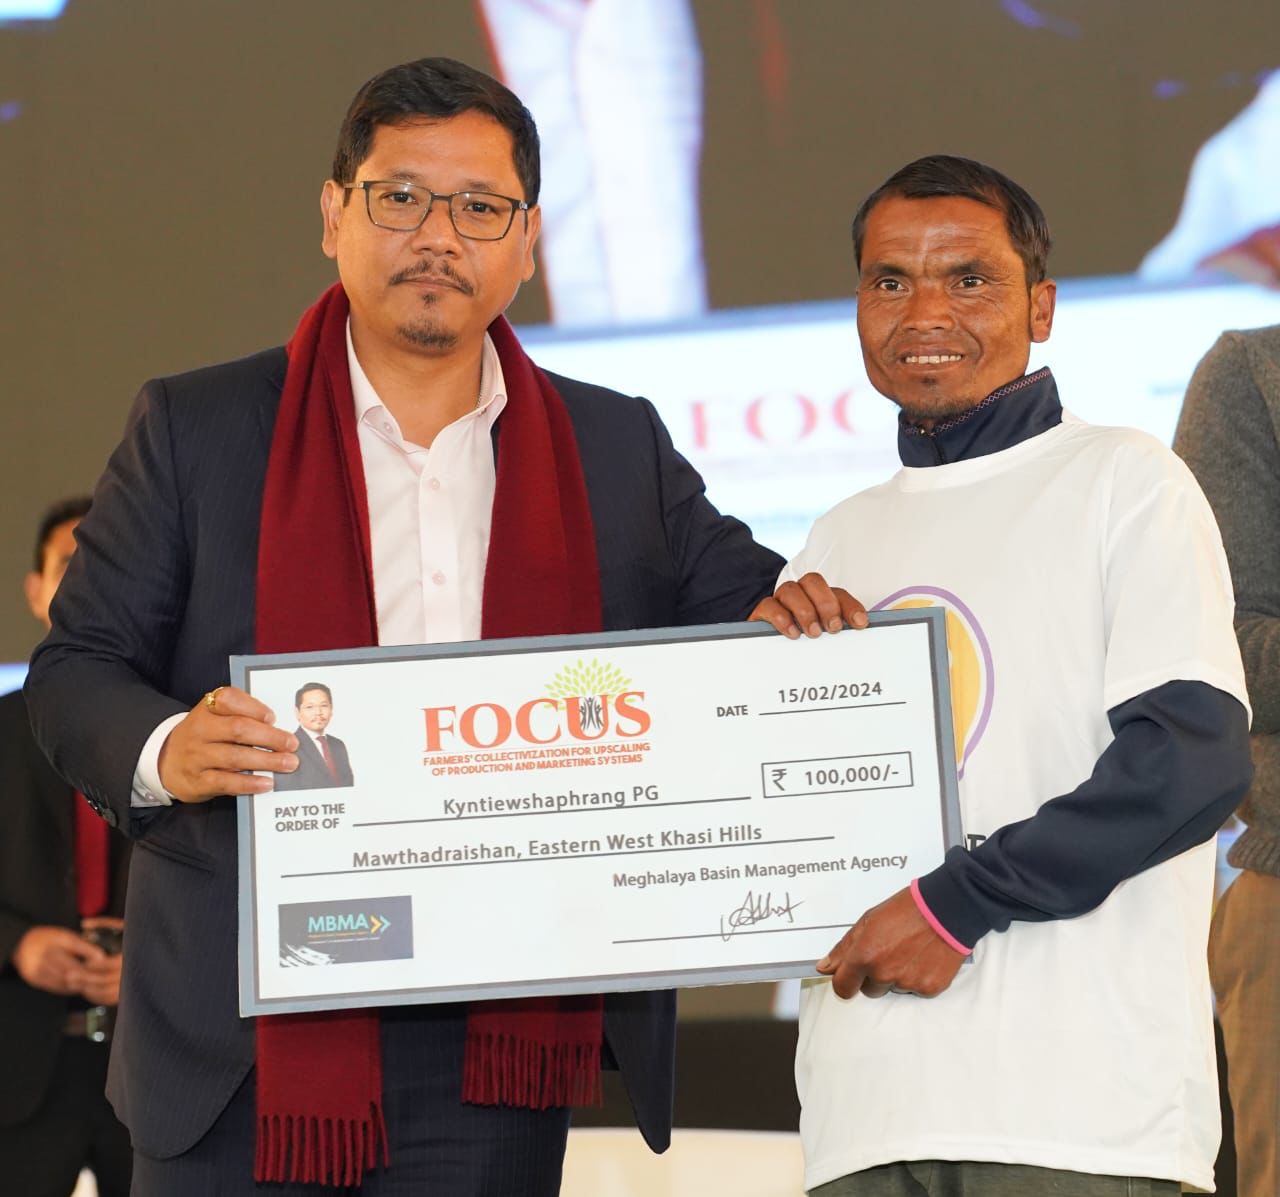 Meghalaya CM inaugurates CM-CONNECT to enable citizens to connect with Govt